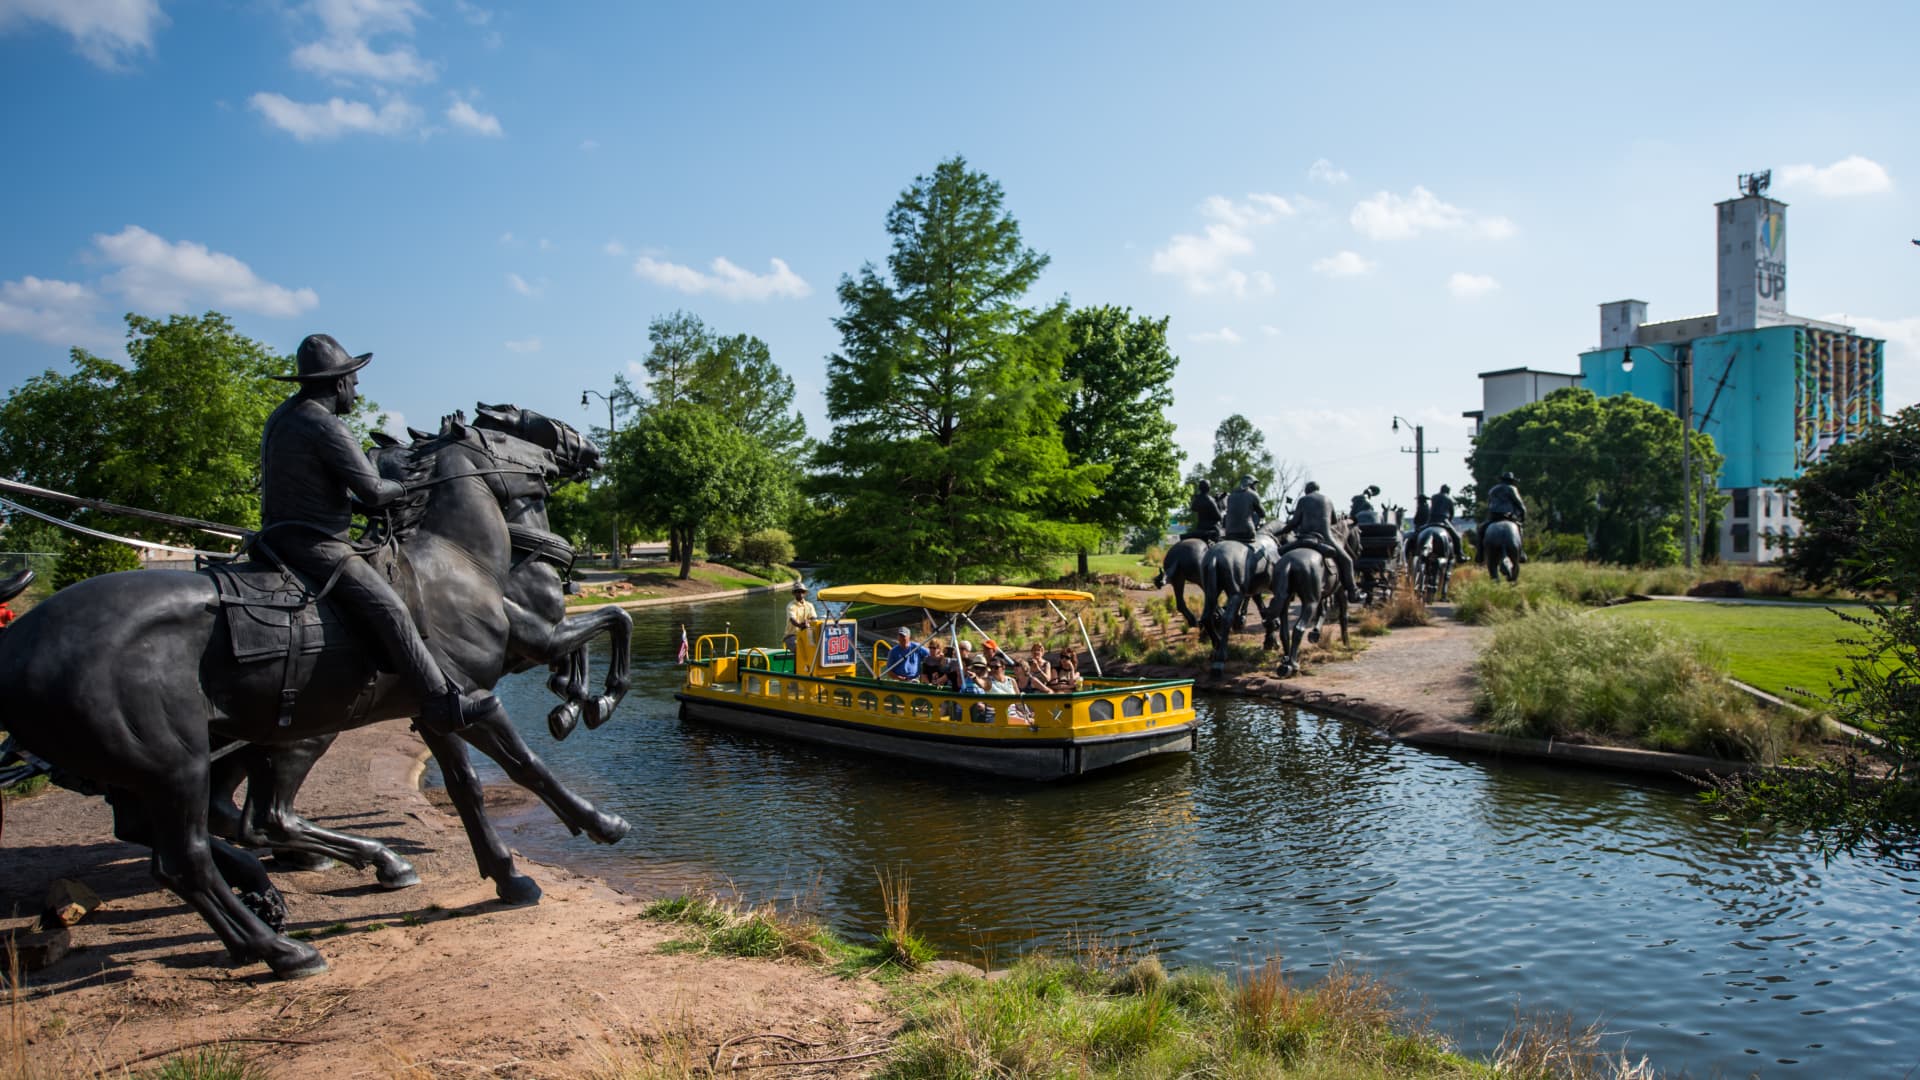 A tourist boat passes cowboy statues along Oklahoma City's Bricktown Canal. Western heritage is a big draw in Oklahoma's capital.